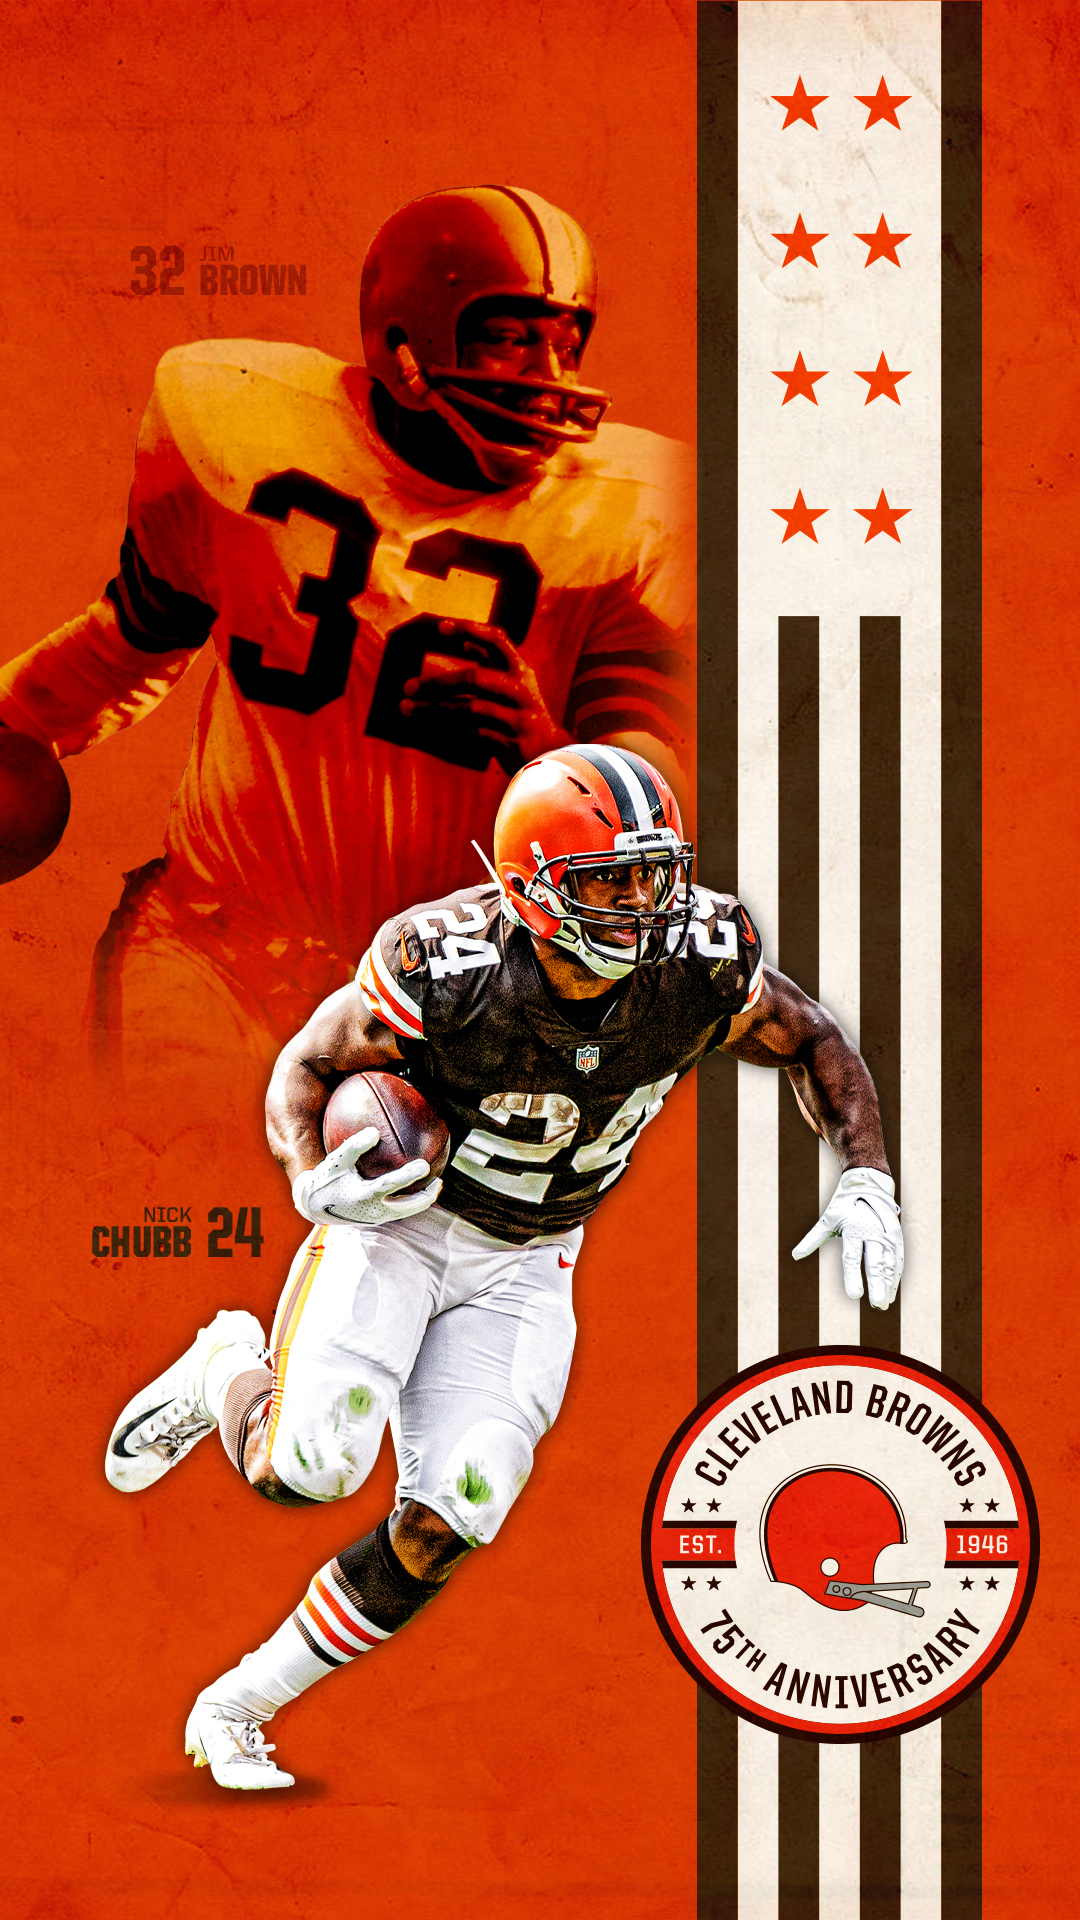 Cleveland Browns on X: 'Today we're celebrating with our Browns